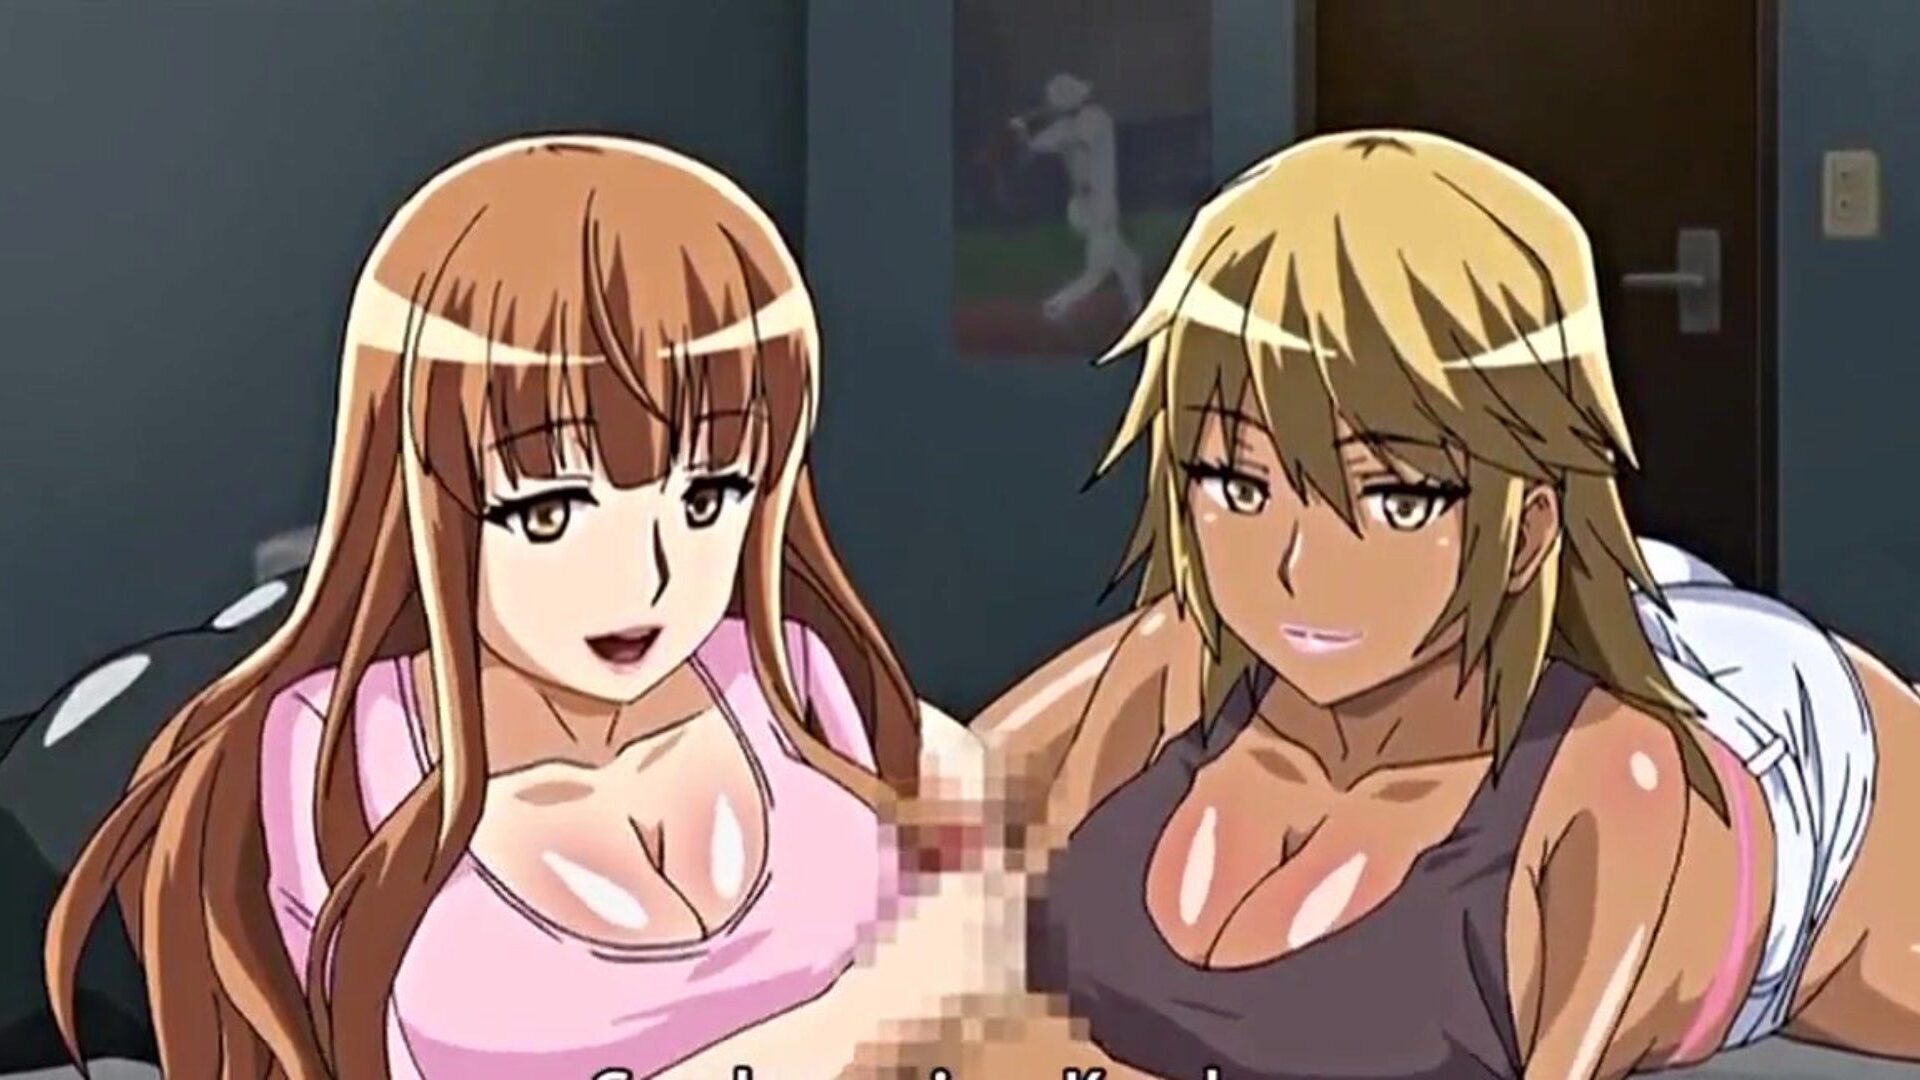 Sei-Yariman Pakopako Nikki The Animation, Porn AC: Xhamster Watch Sei-Yariman Pakopako Nikki The Animation Episode on Xhamster, the most good HD Bang-Out Tube Web Page with ton of free cartoon and hentai pornography episodes